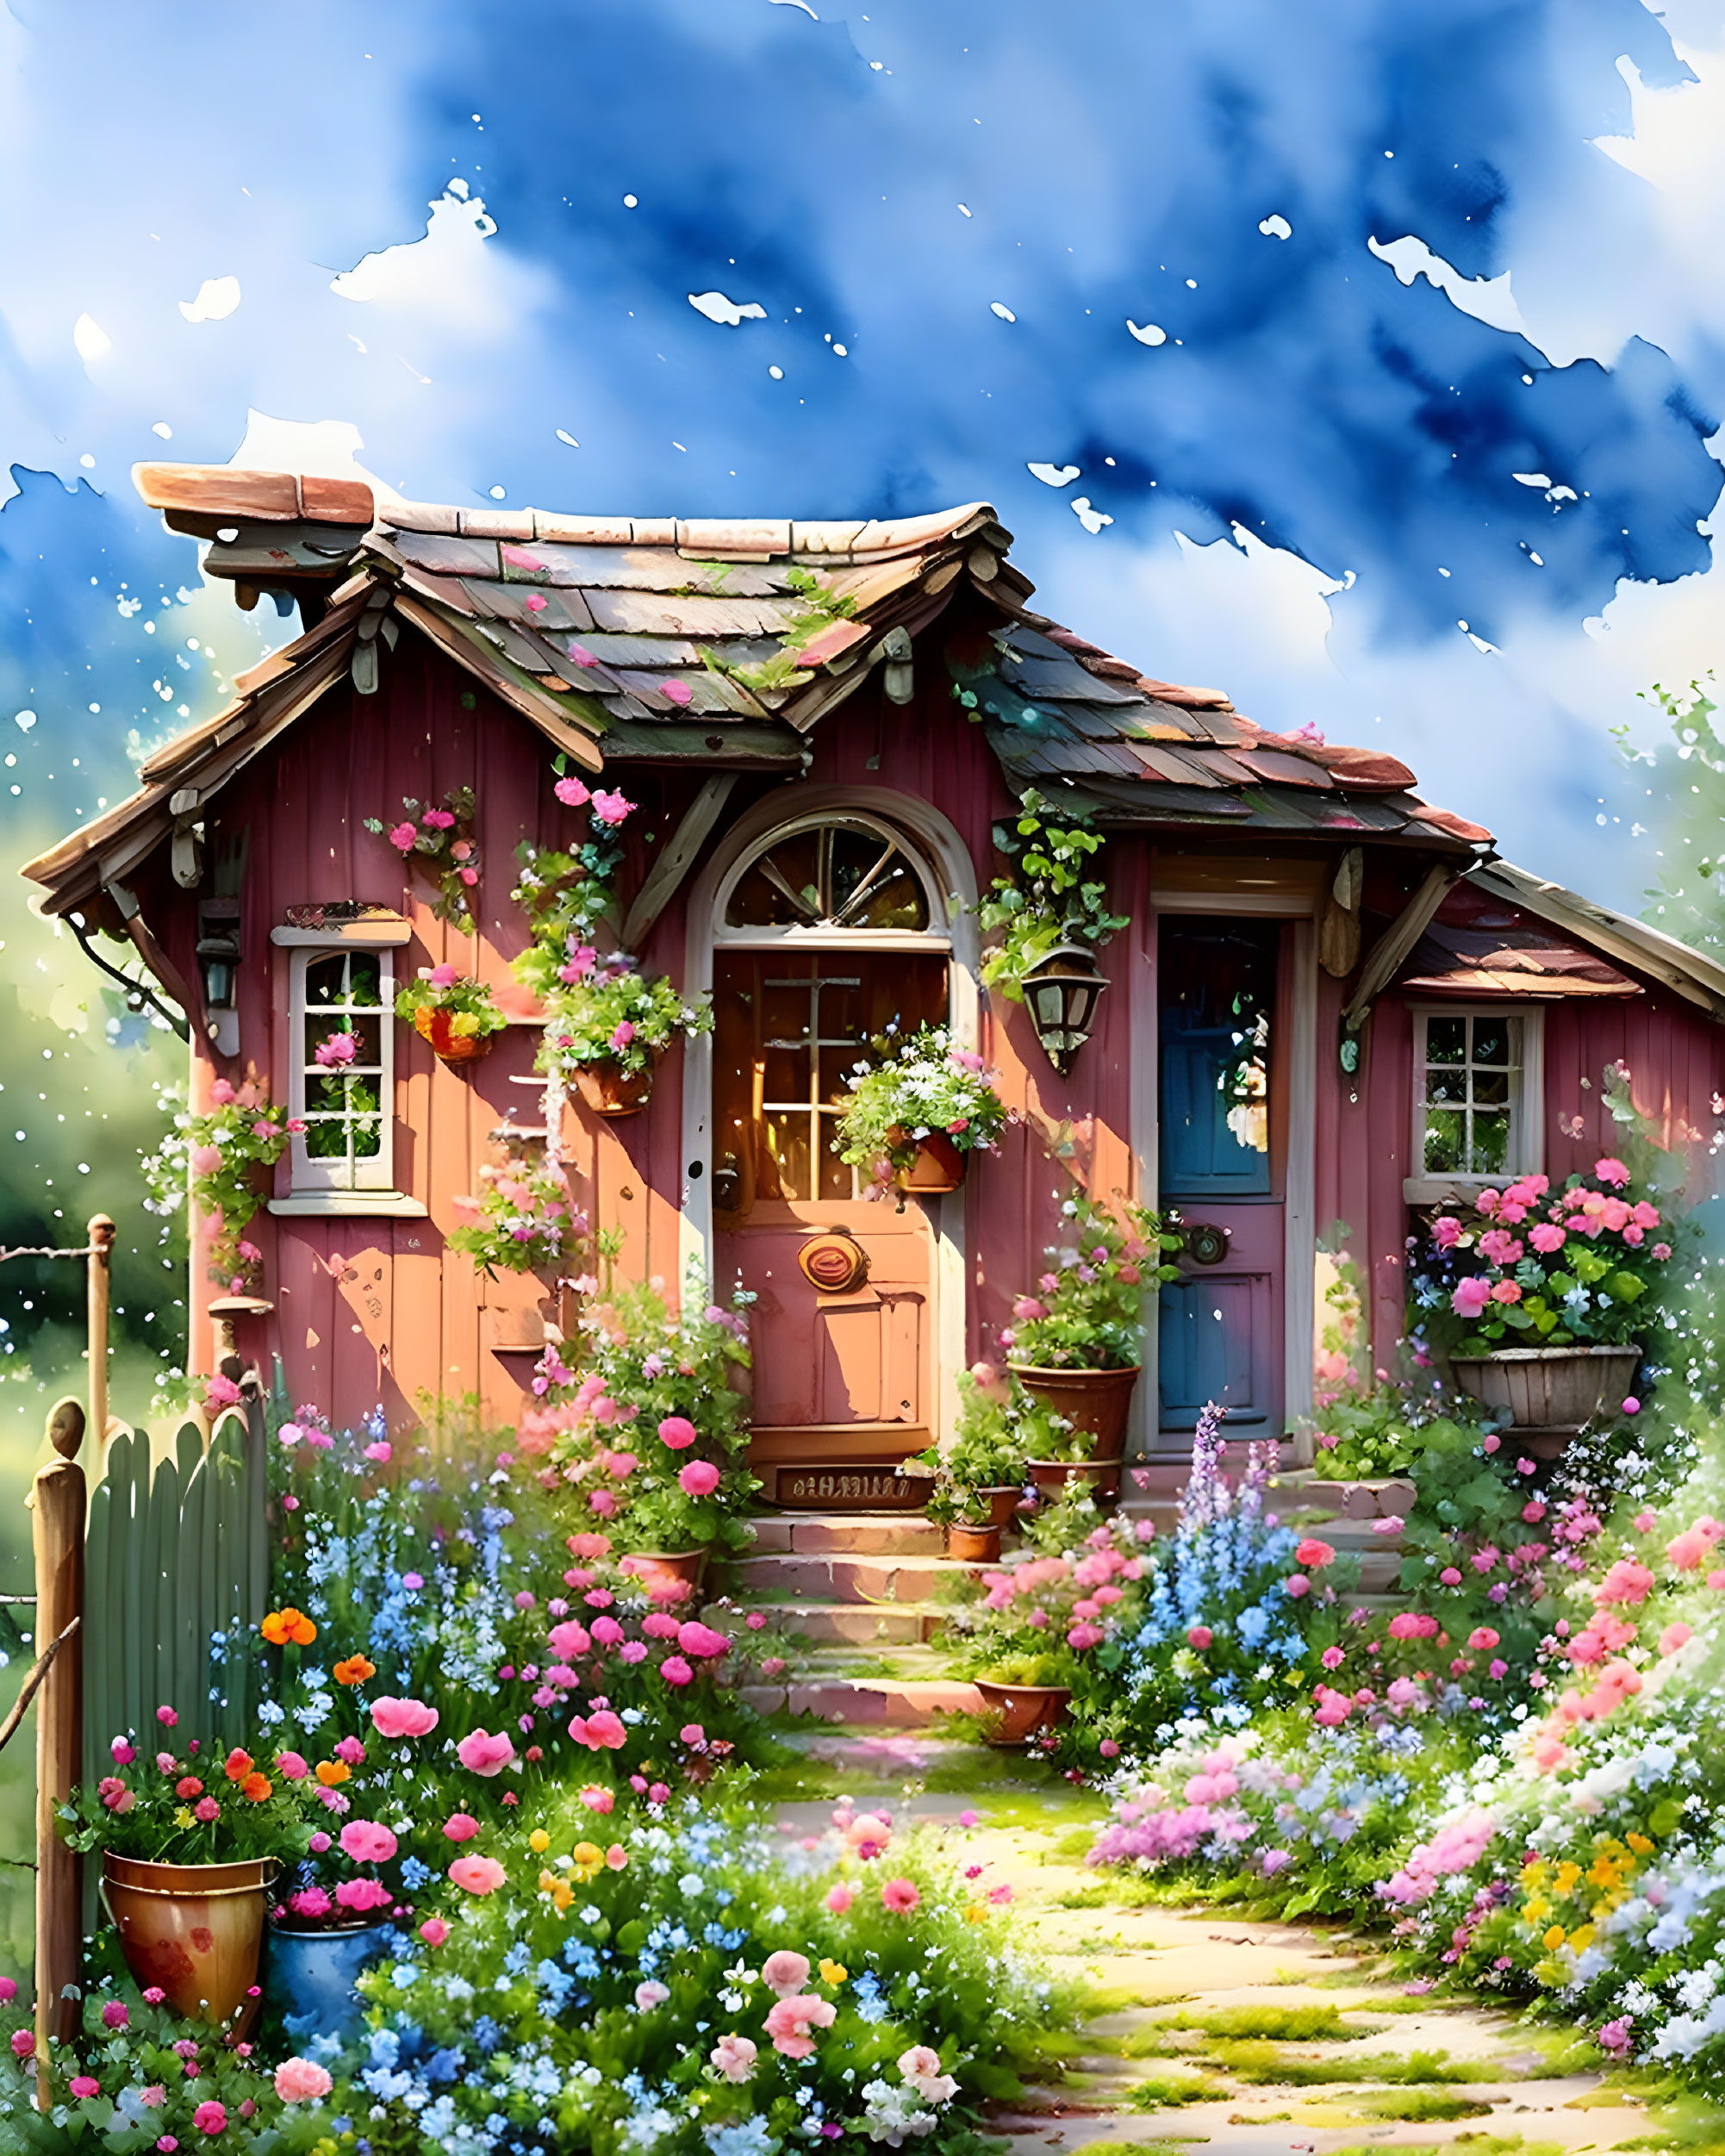 Charming wooden cottage with climbing flowers in a vibrant garden